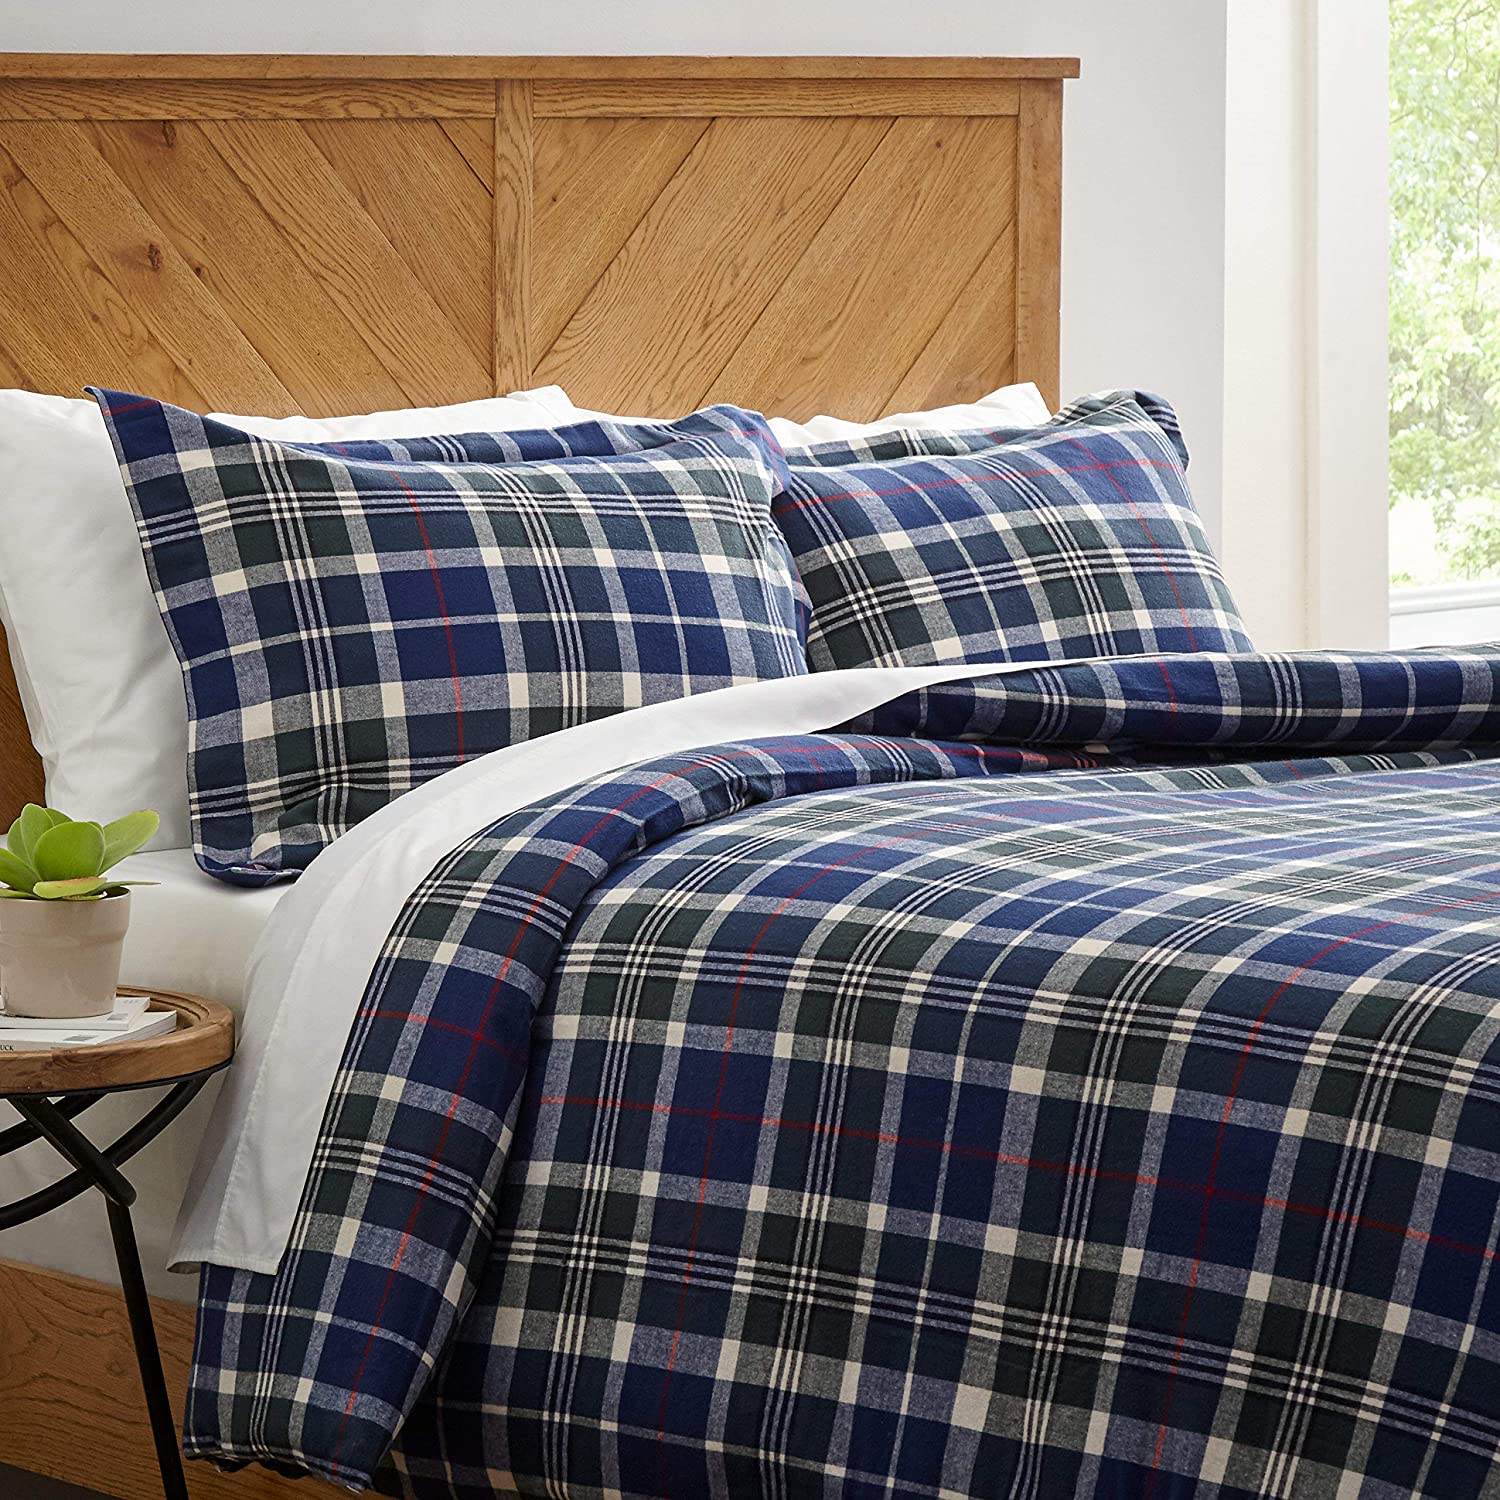 Price:$90.49  Brand – Stone & Beam Rustic Plaid Flannel Duvet Cover Set, King, Blue and Green : Home & Kitchen